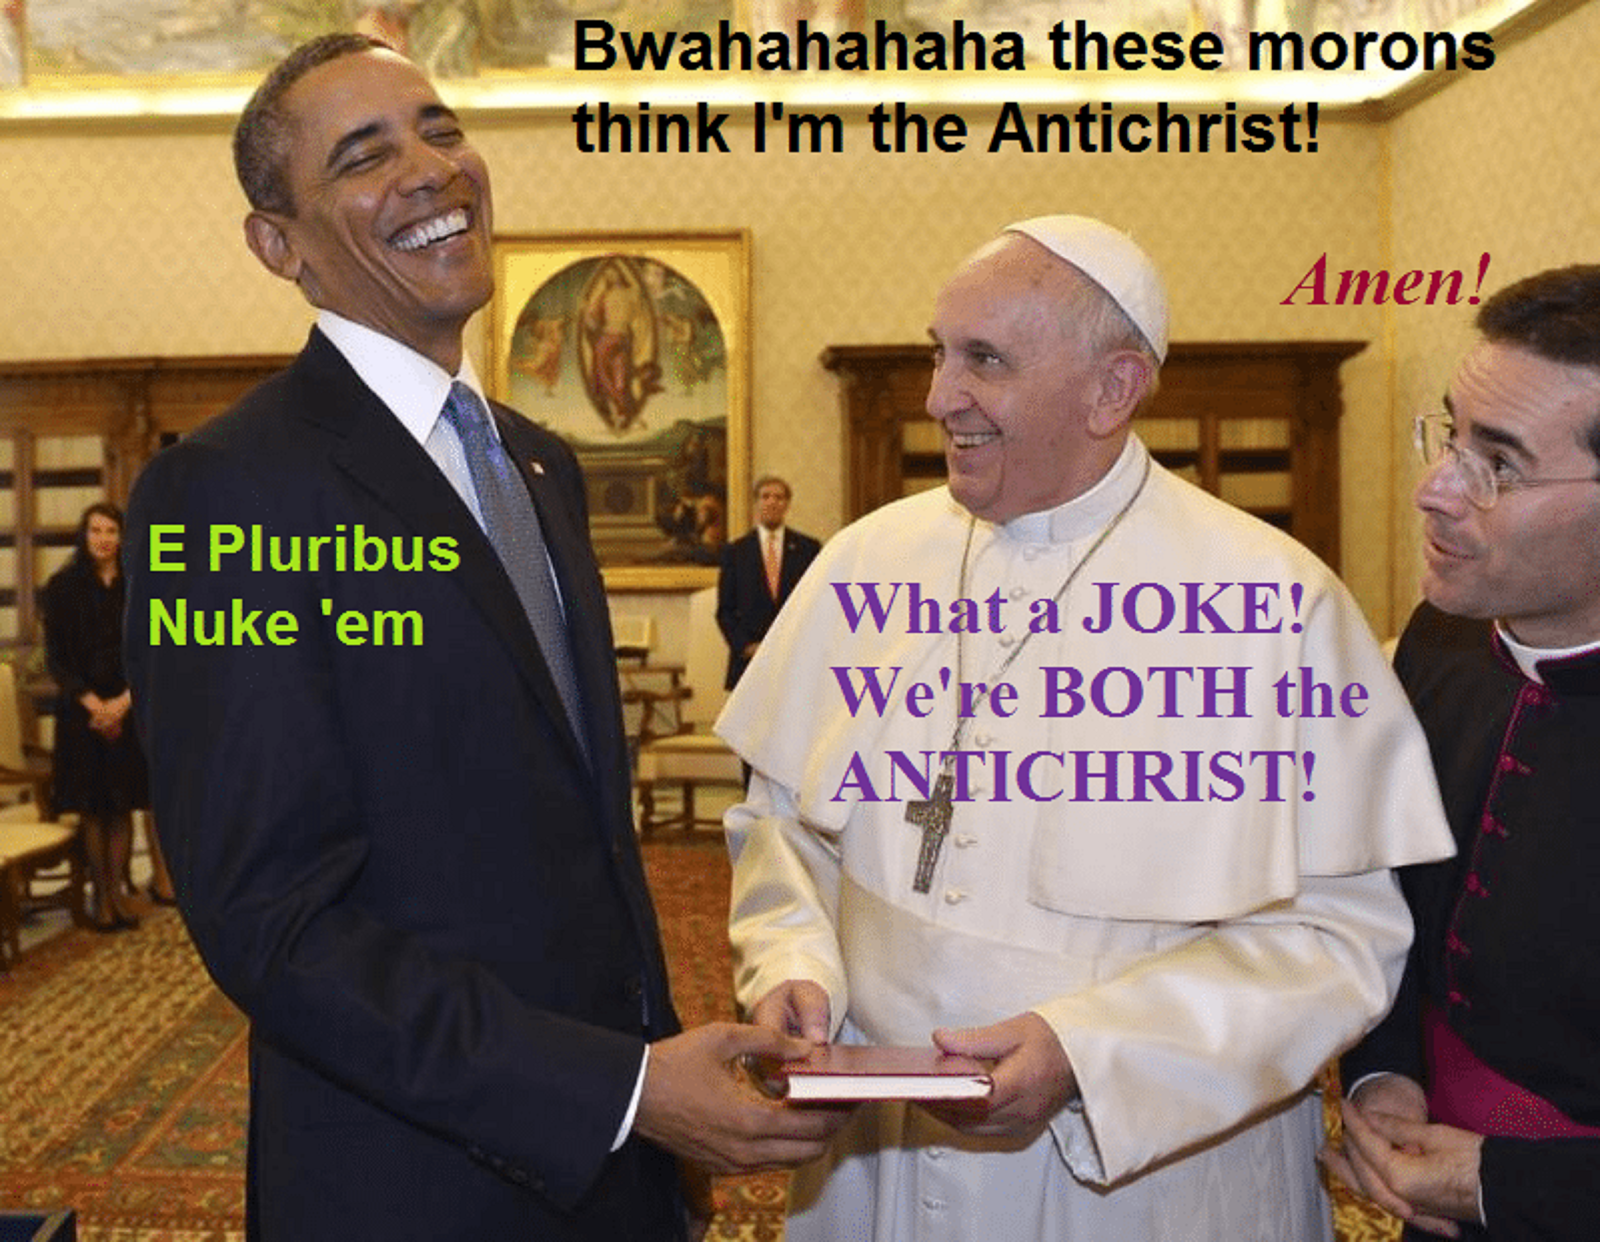 THE ANTICHRIST JOKE - THEY BOTH GET ROBBED OF THE LAST LAUGH